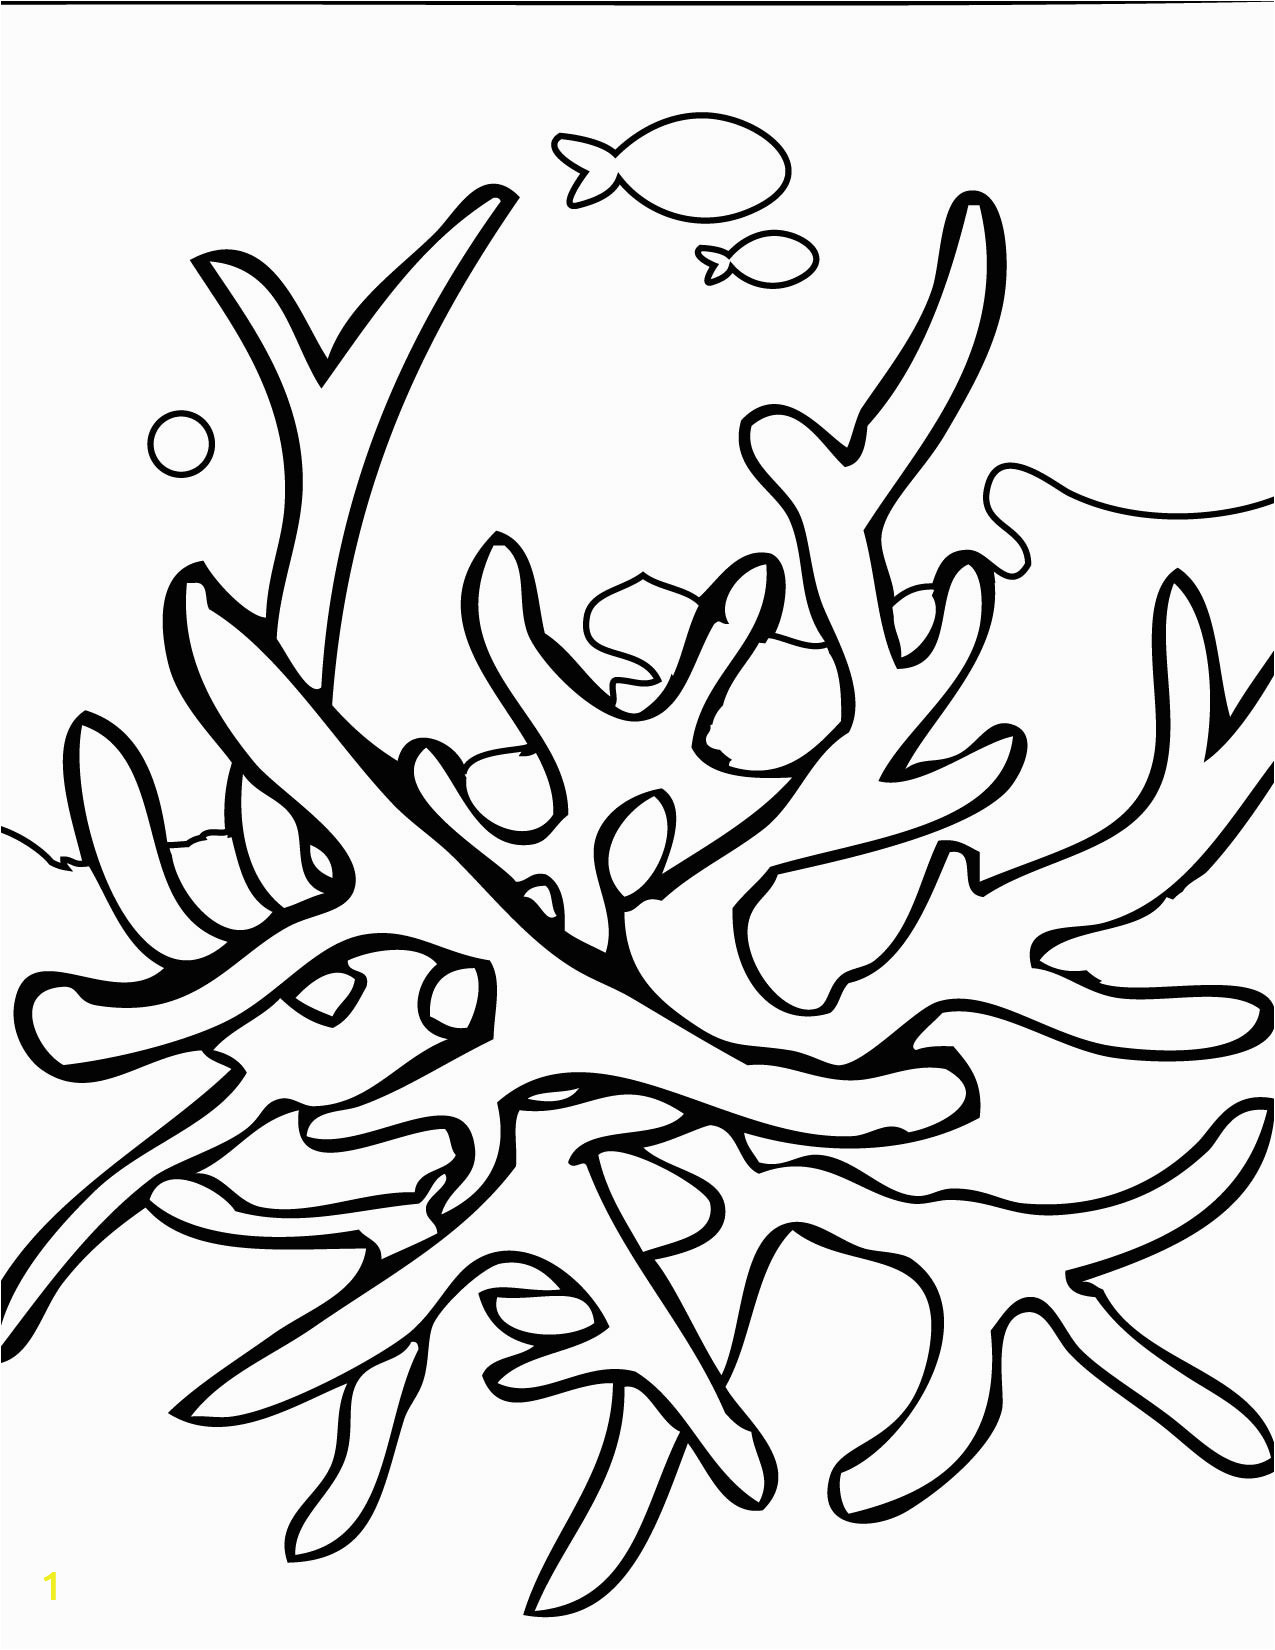 Coral Reef Coloring Pages to Print Coral Reef Coloring Download Coral Reef Coloring for Free